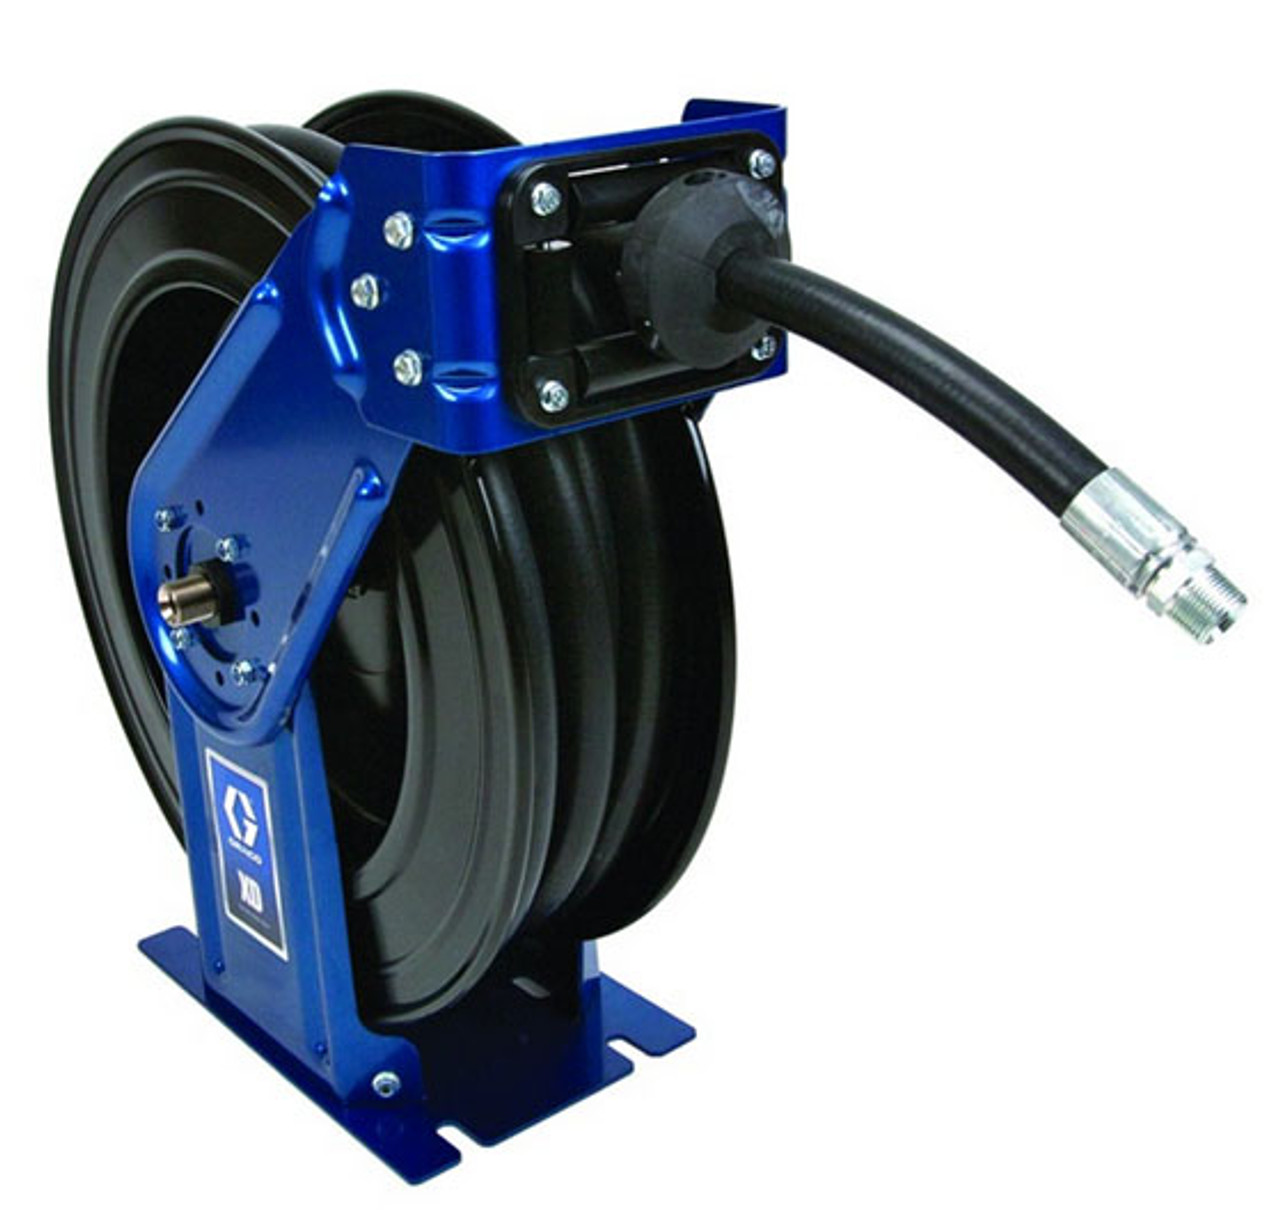 Graco XD30 Grease Hose Reel w/ 3/8 in. x 75 ft. Hose